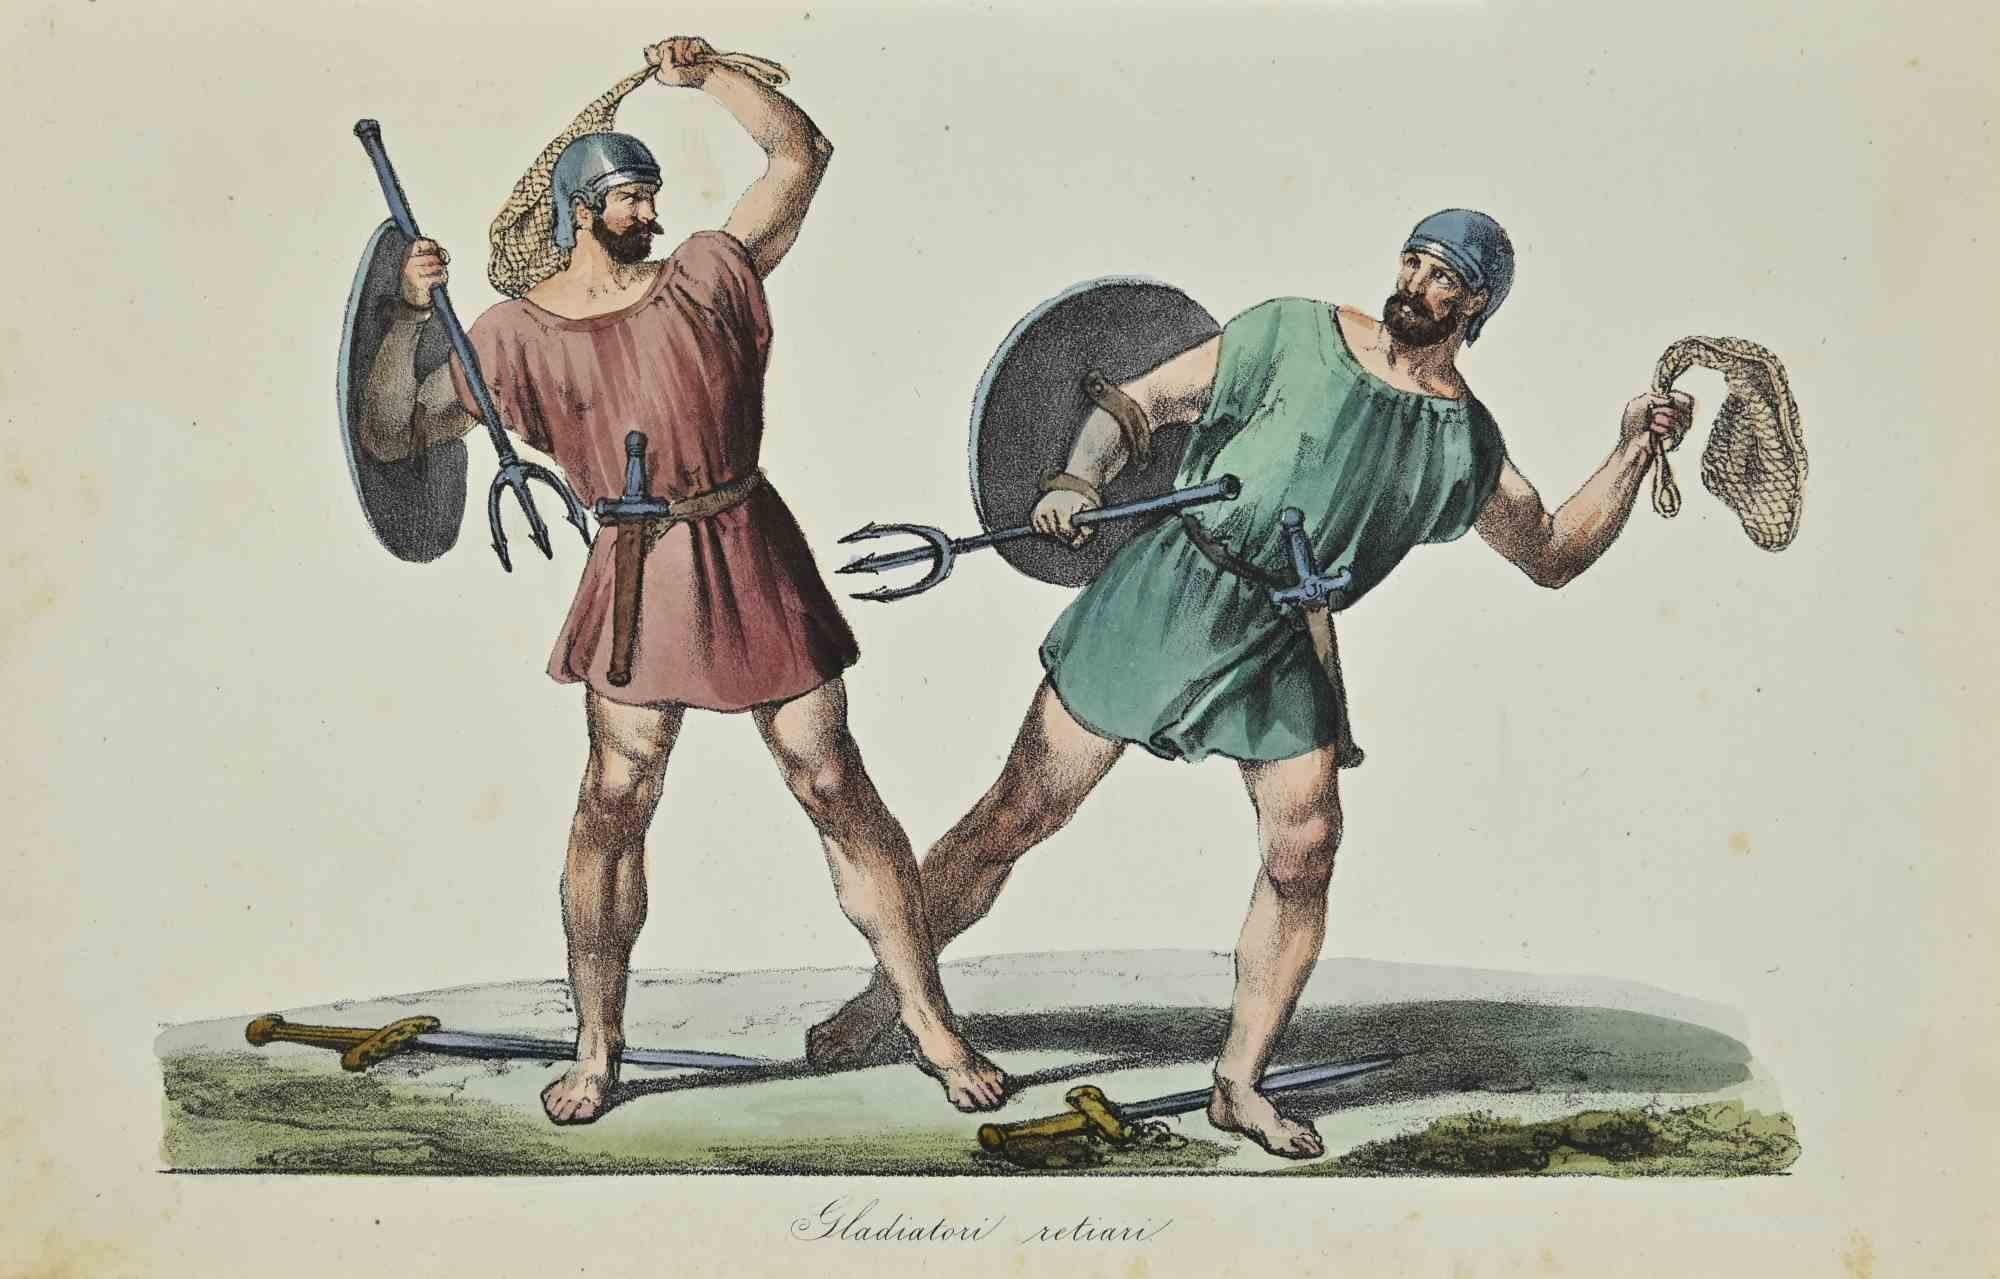 Various Artists Figurative Print - Uses and Customs -Gladiators - Lithograph - 1862